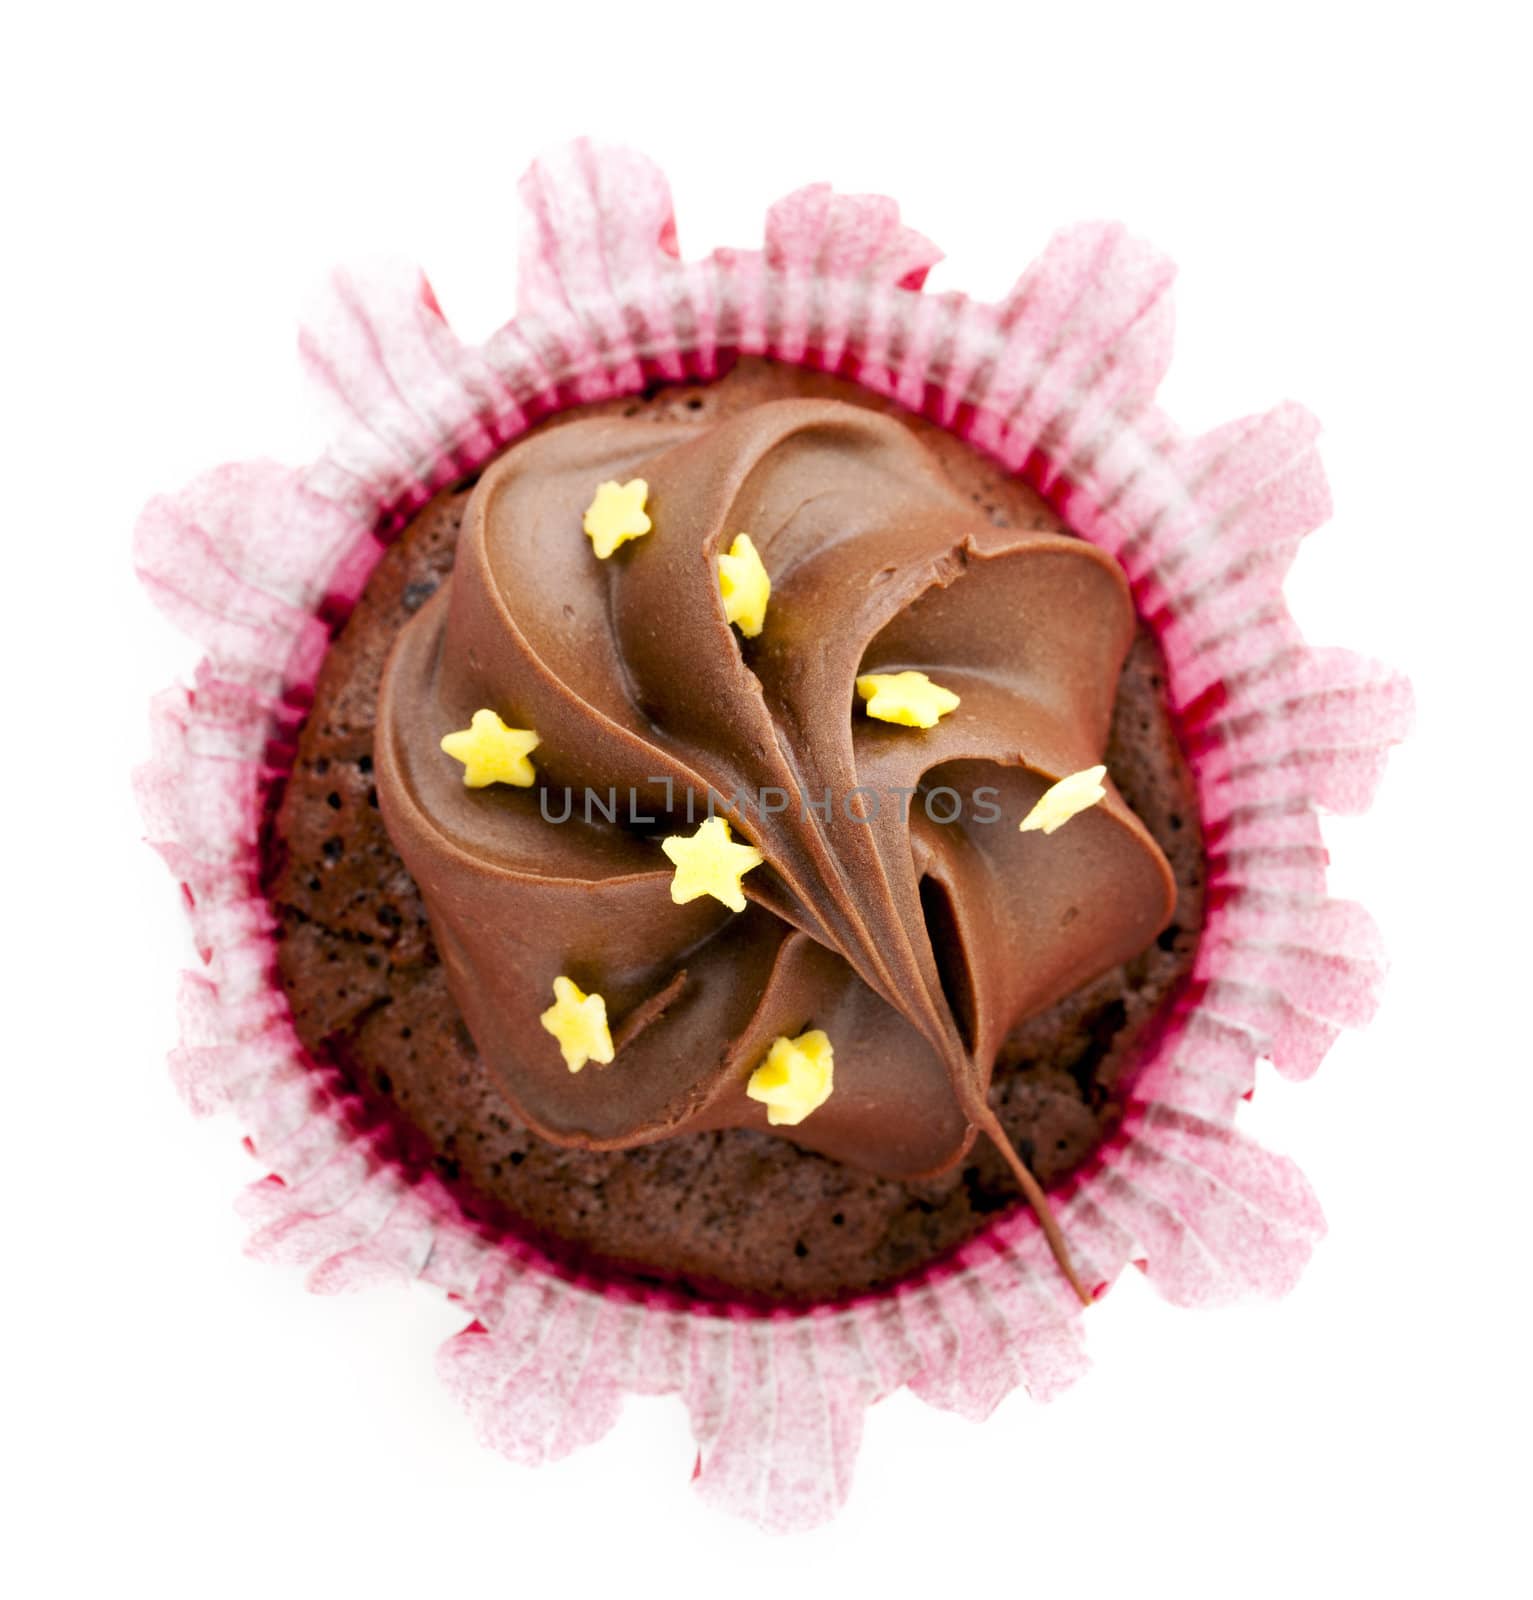 Directly above view of chocolate cupcake with frosting and stars.